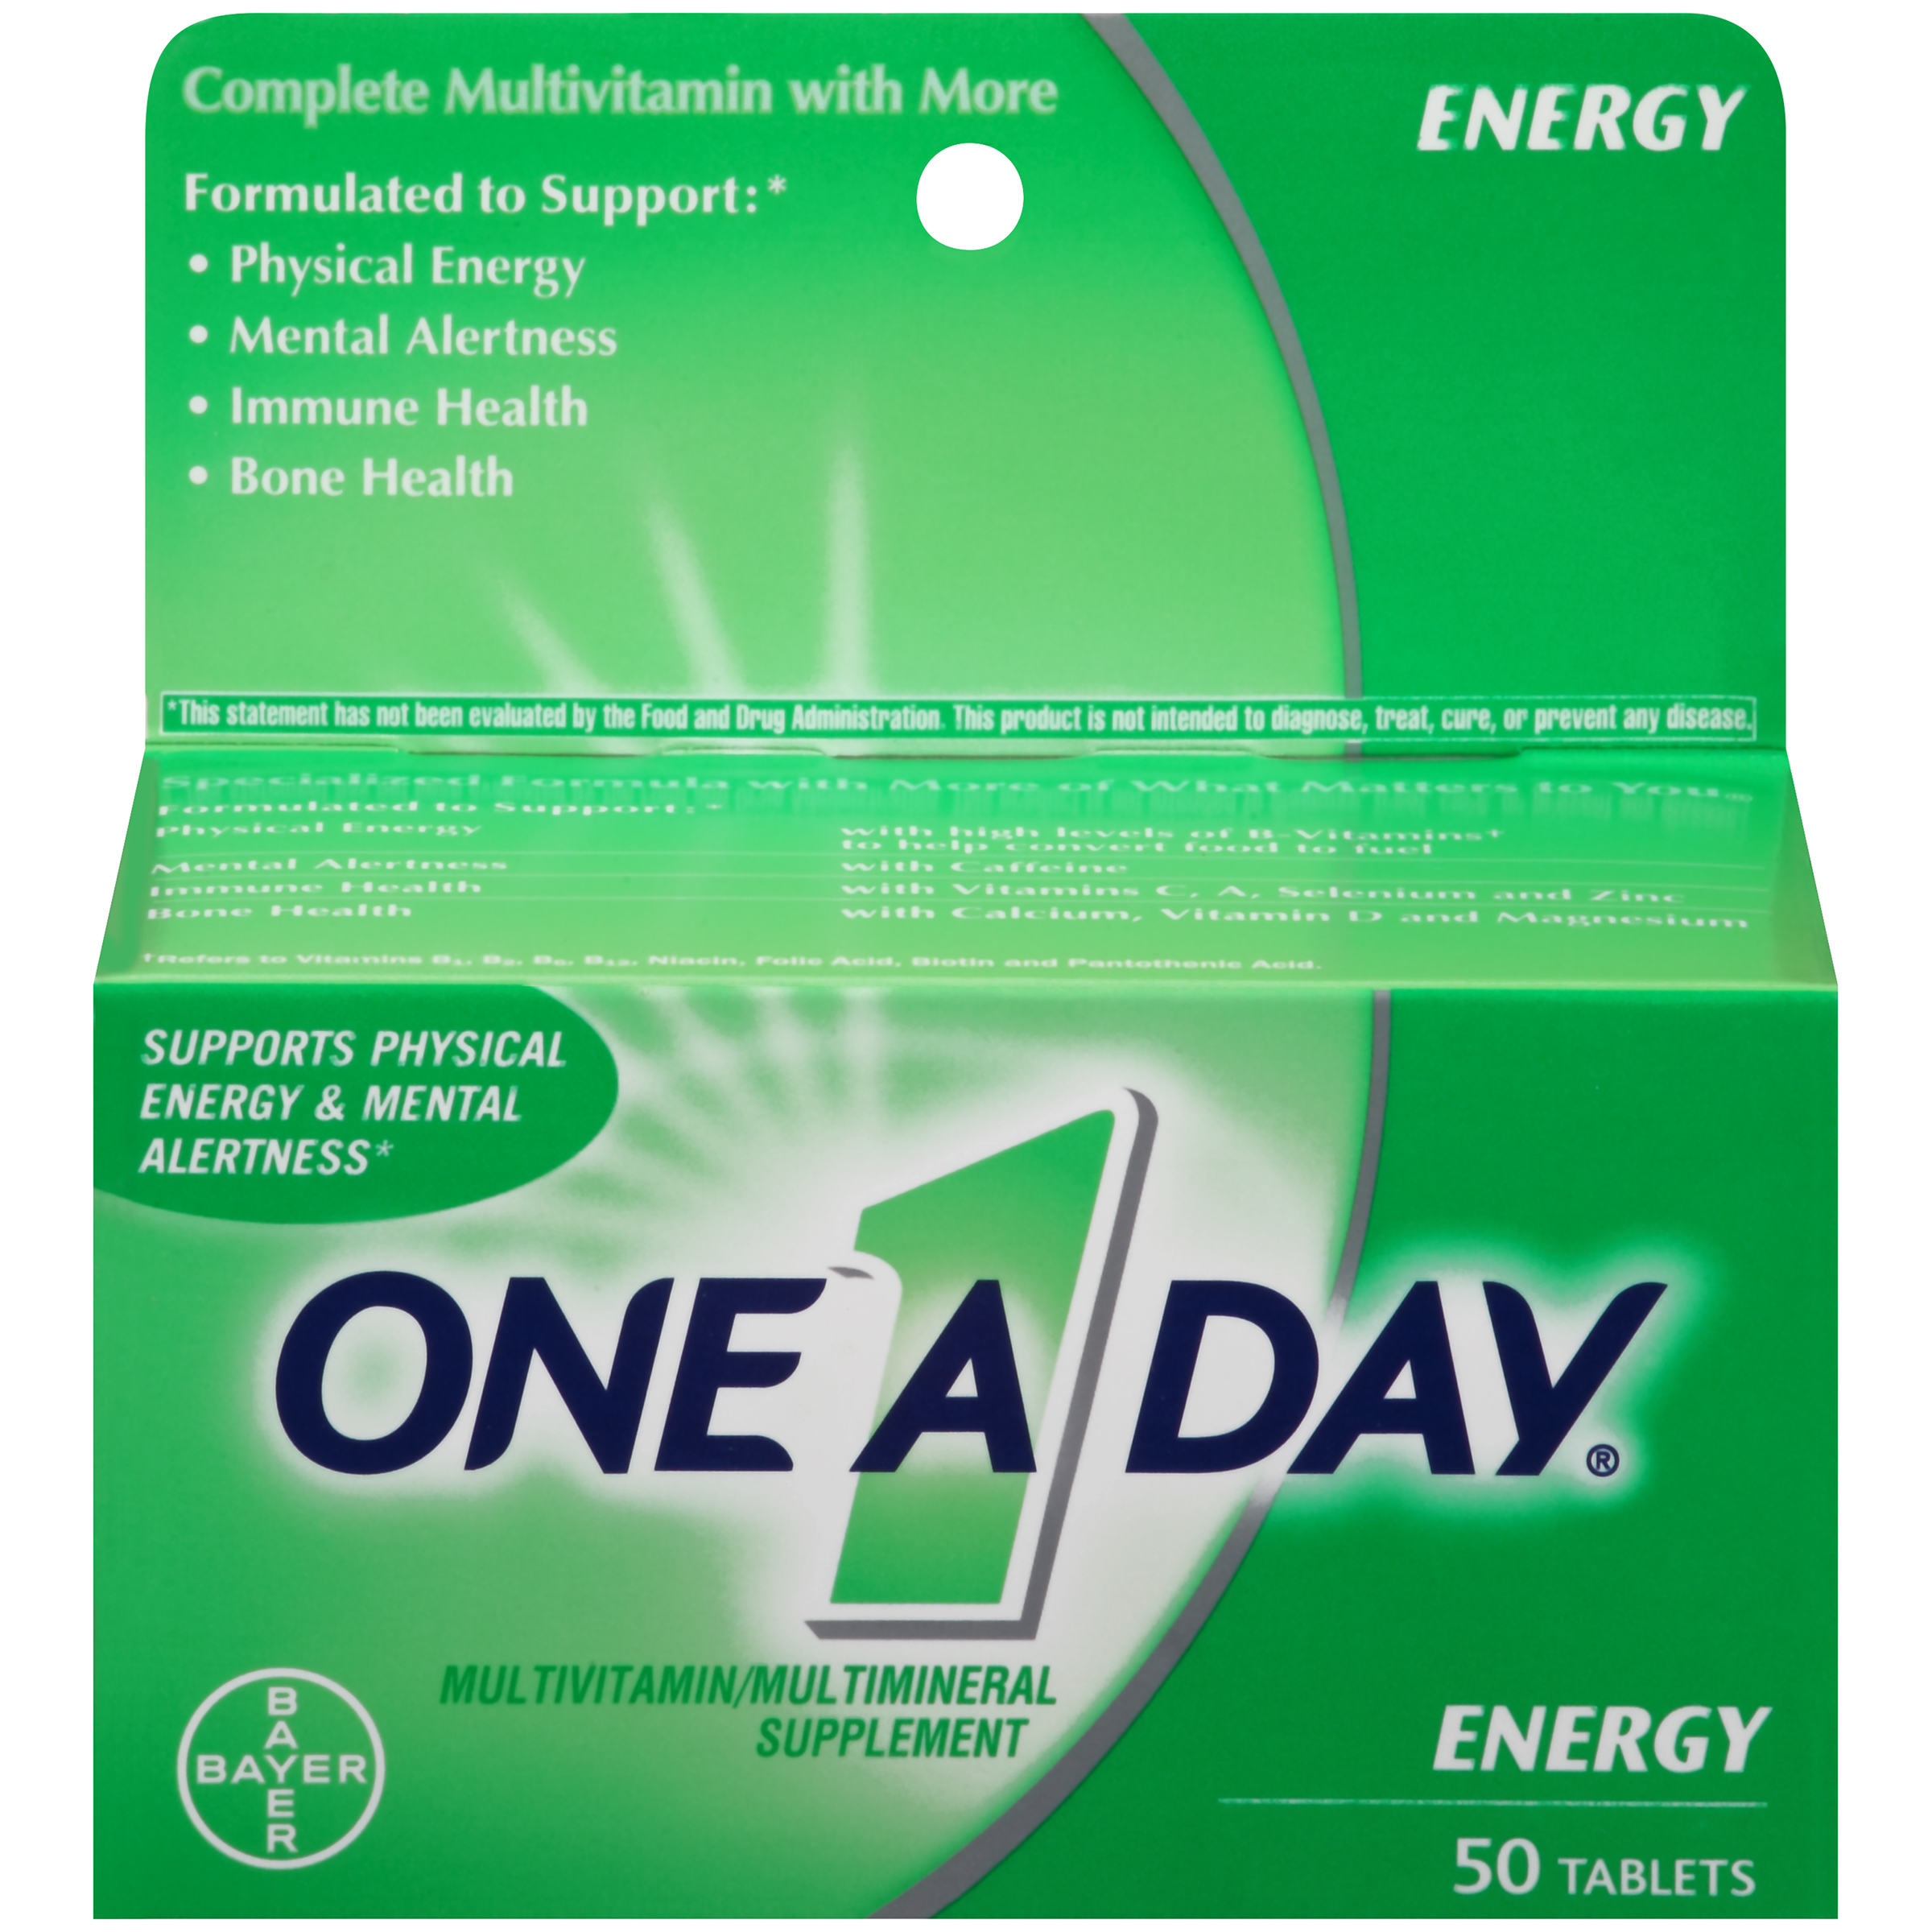 One A Day Energy, Multivitamin Supplement including Caffeine, Vitamins A, C, E, B1, B2, B6, B12, Calcium and Vitamin D, 50 ct. - image 1 of 5